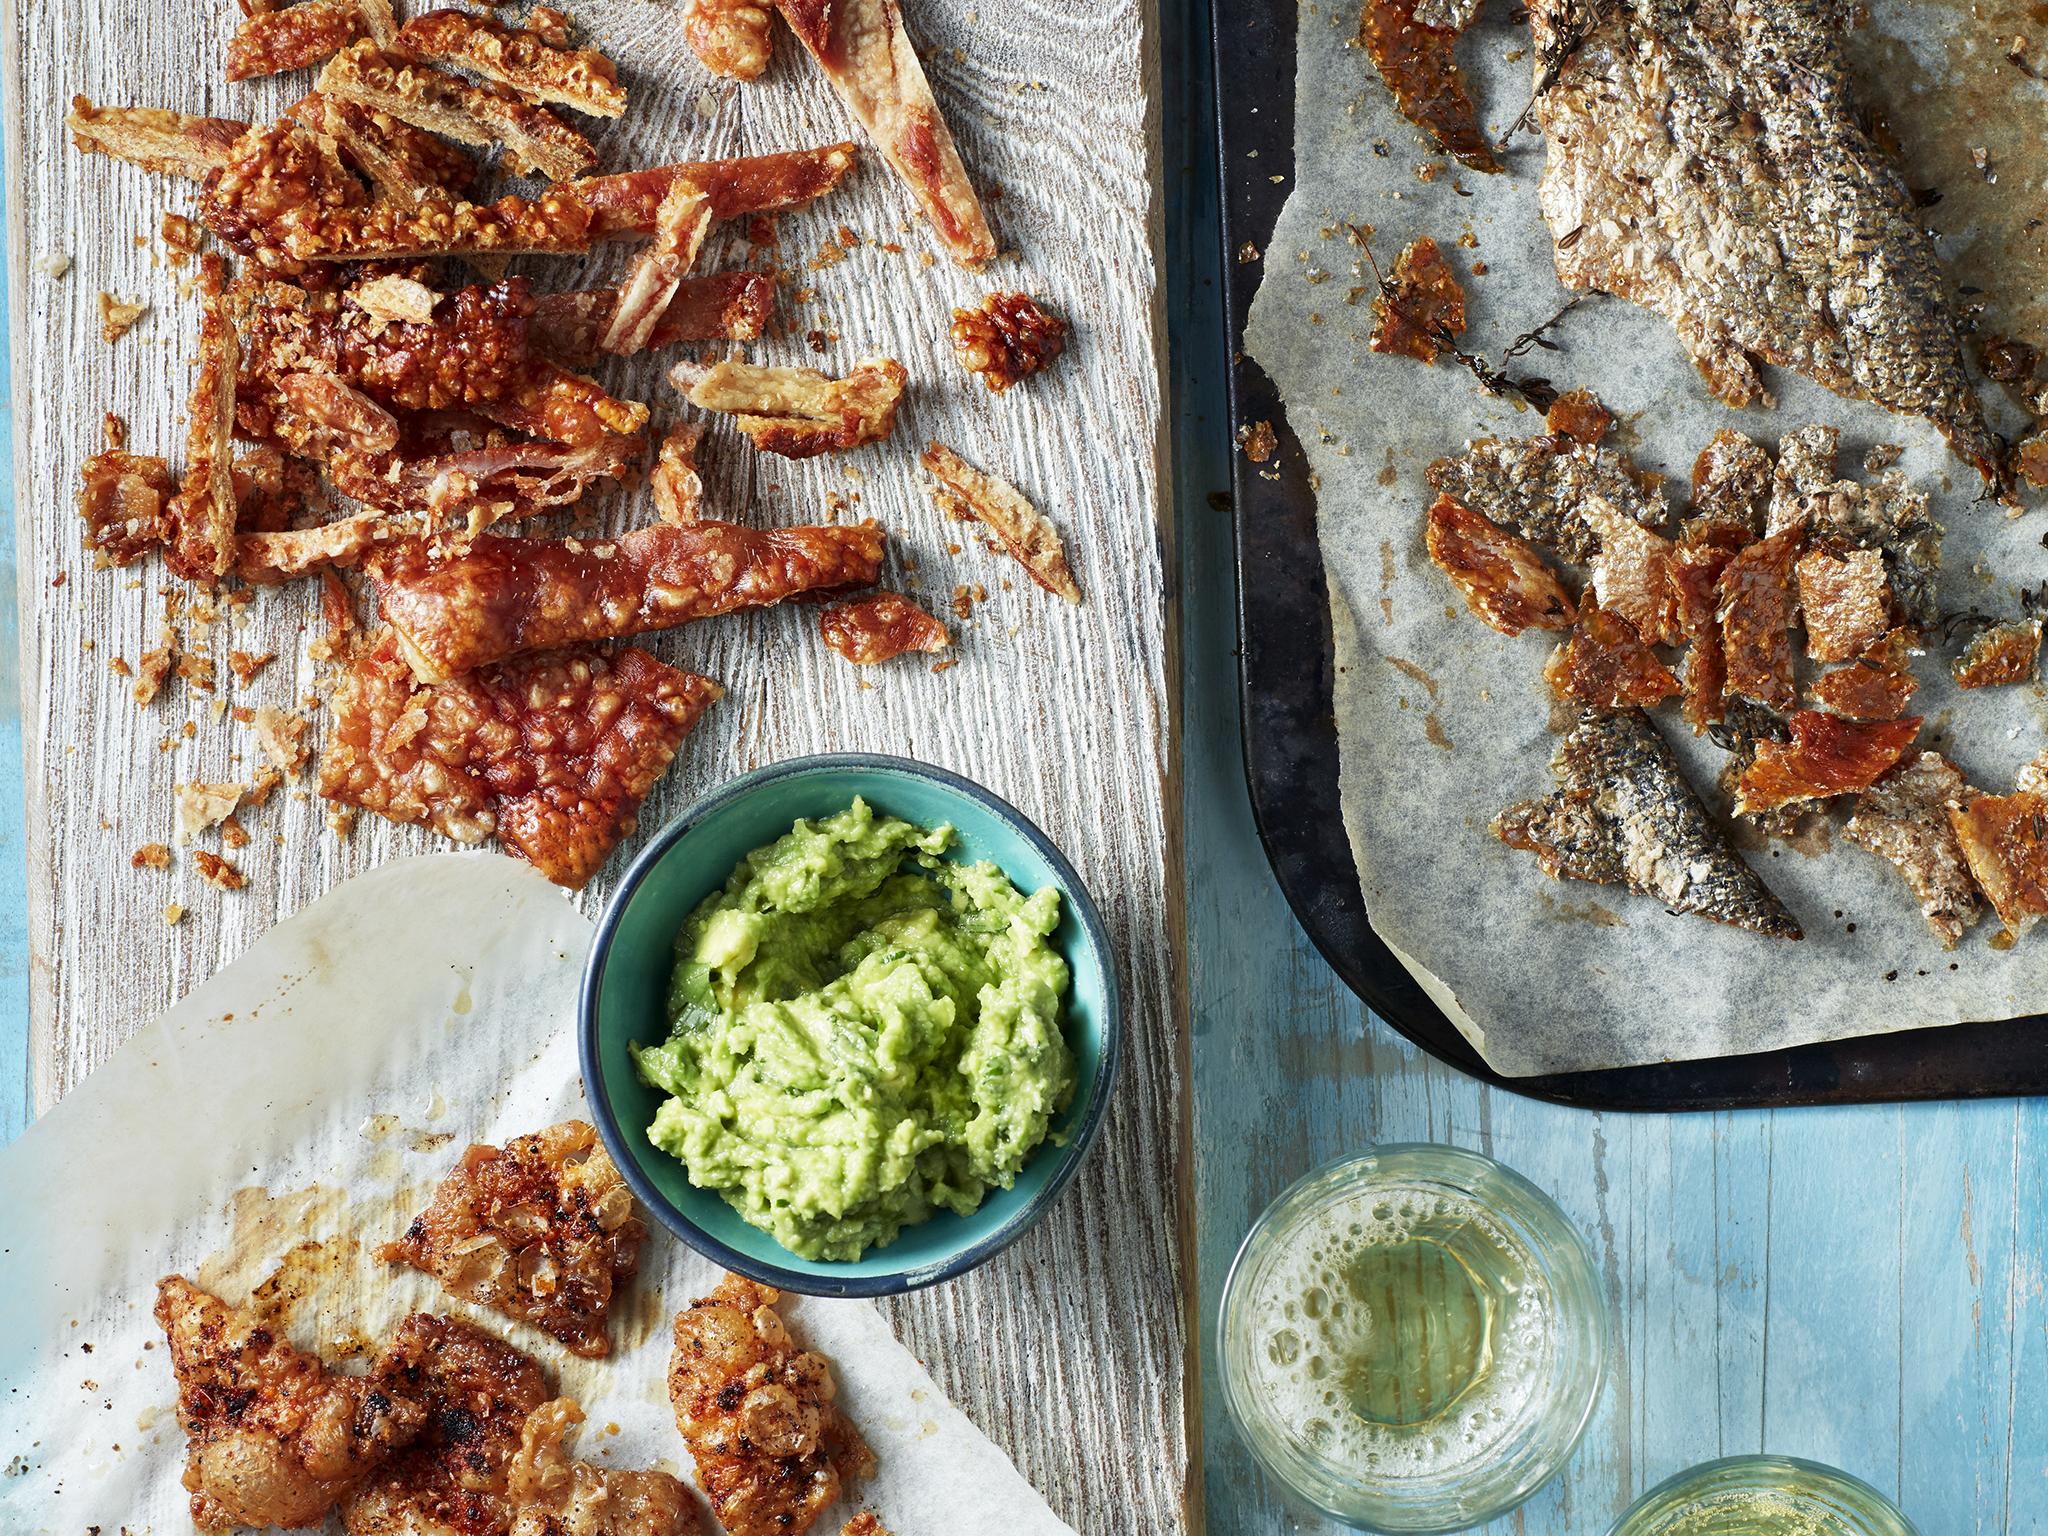 Get crackling: no need to throw chicken skin or the carcass away again